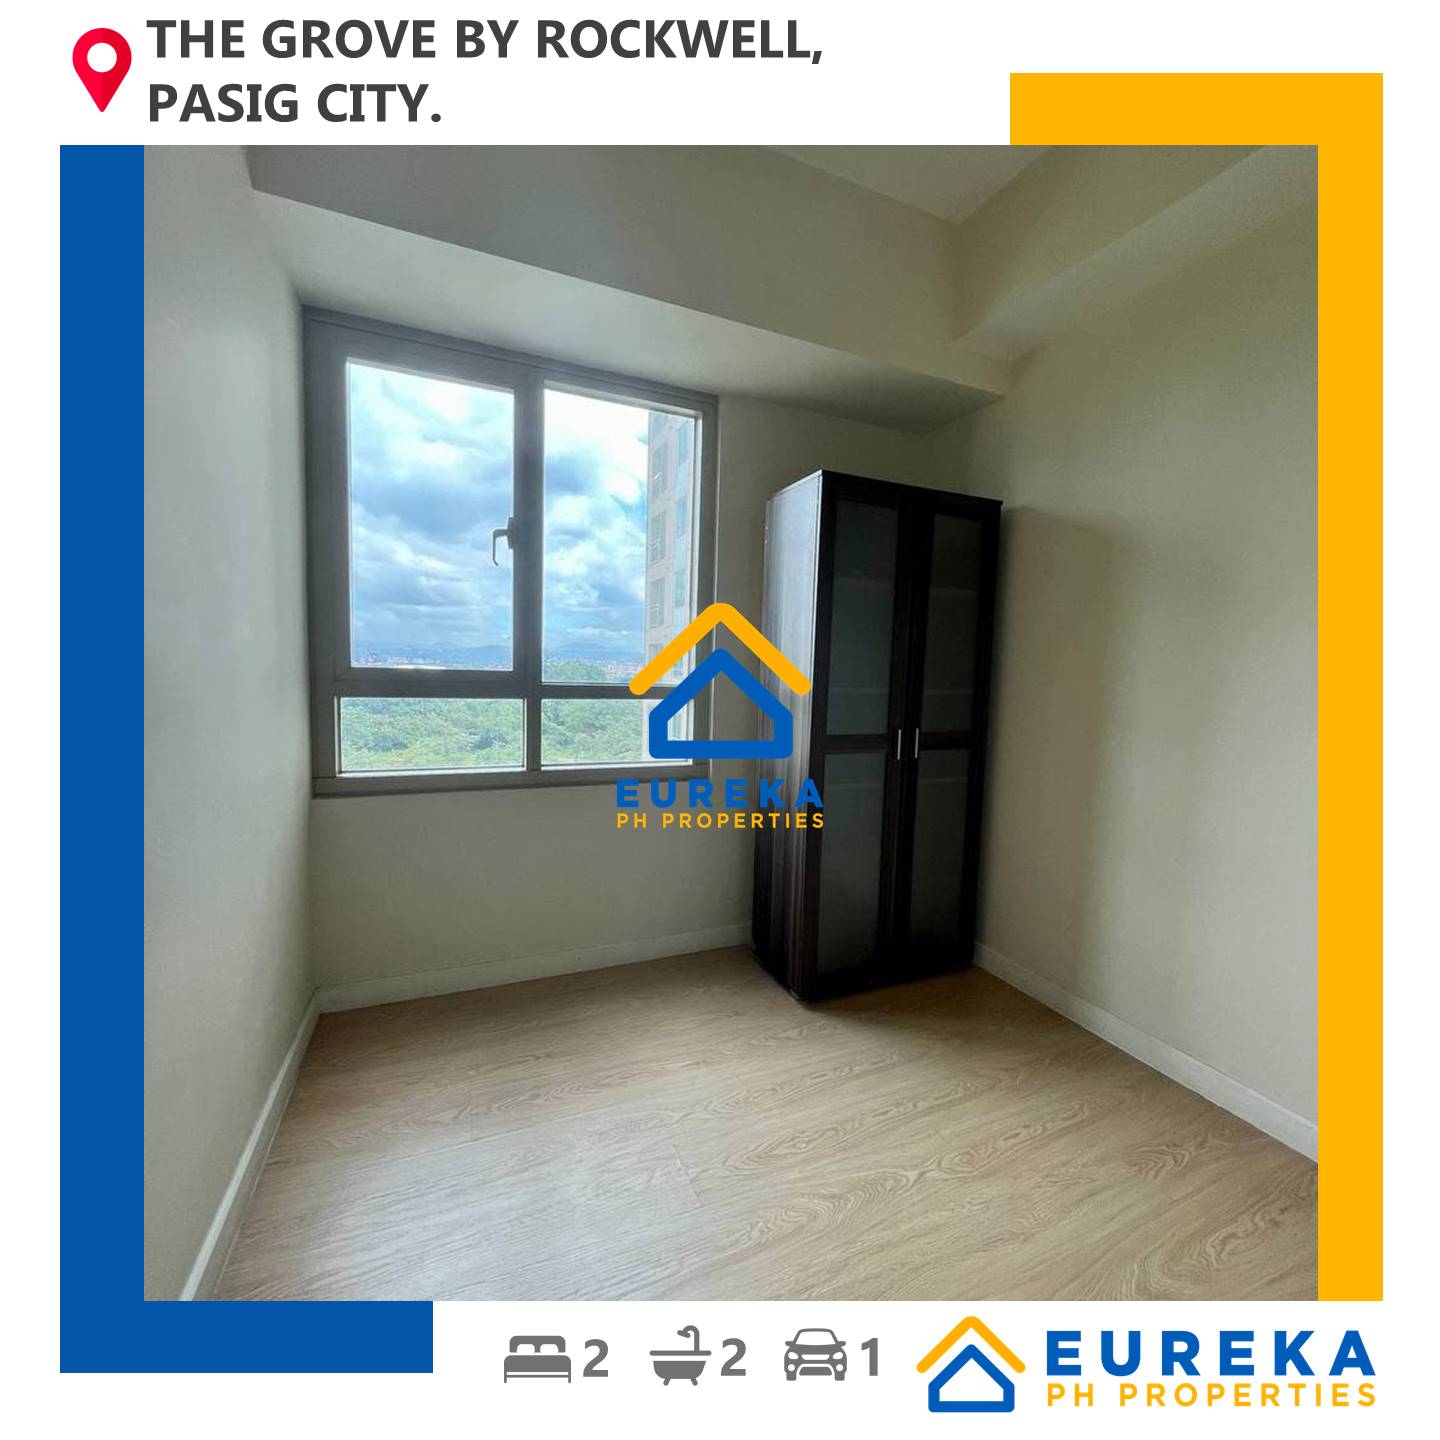 Brand New 2BR 62 sqm w/parking at Grove by Rockwell Pasig